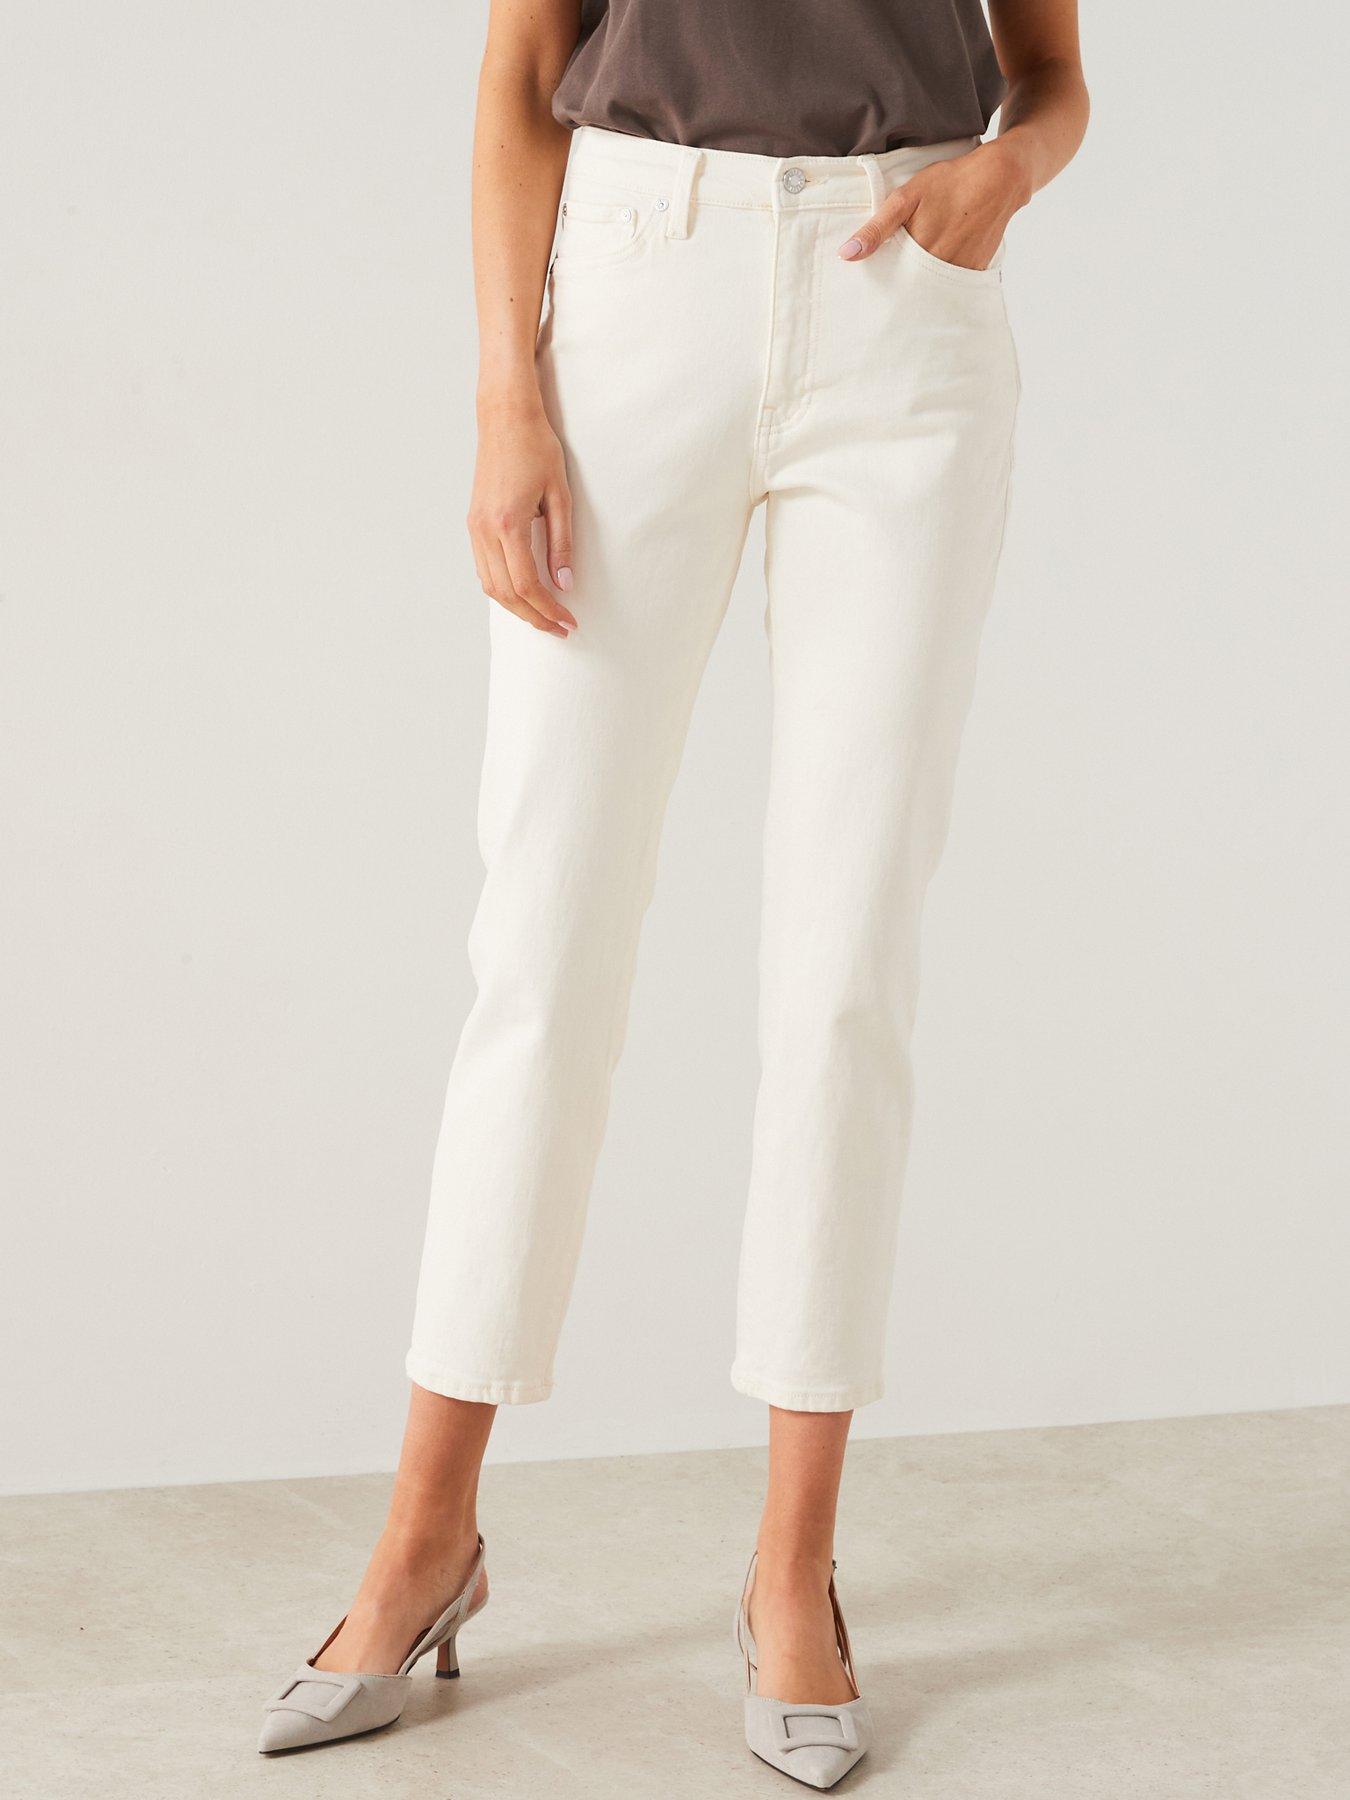 SPANX, Pants & Jumpsuits, Spanxjeanish Ankle Leggings White Jeans Jegging